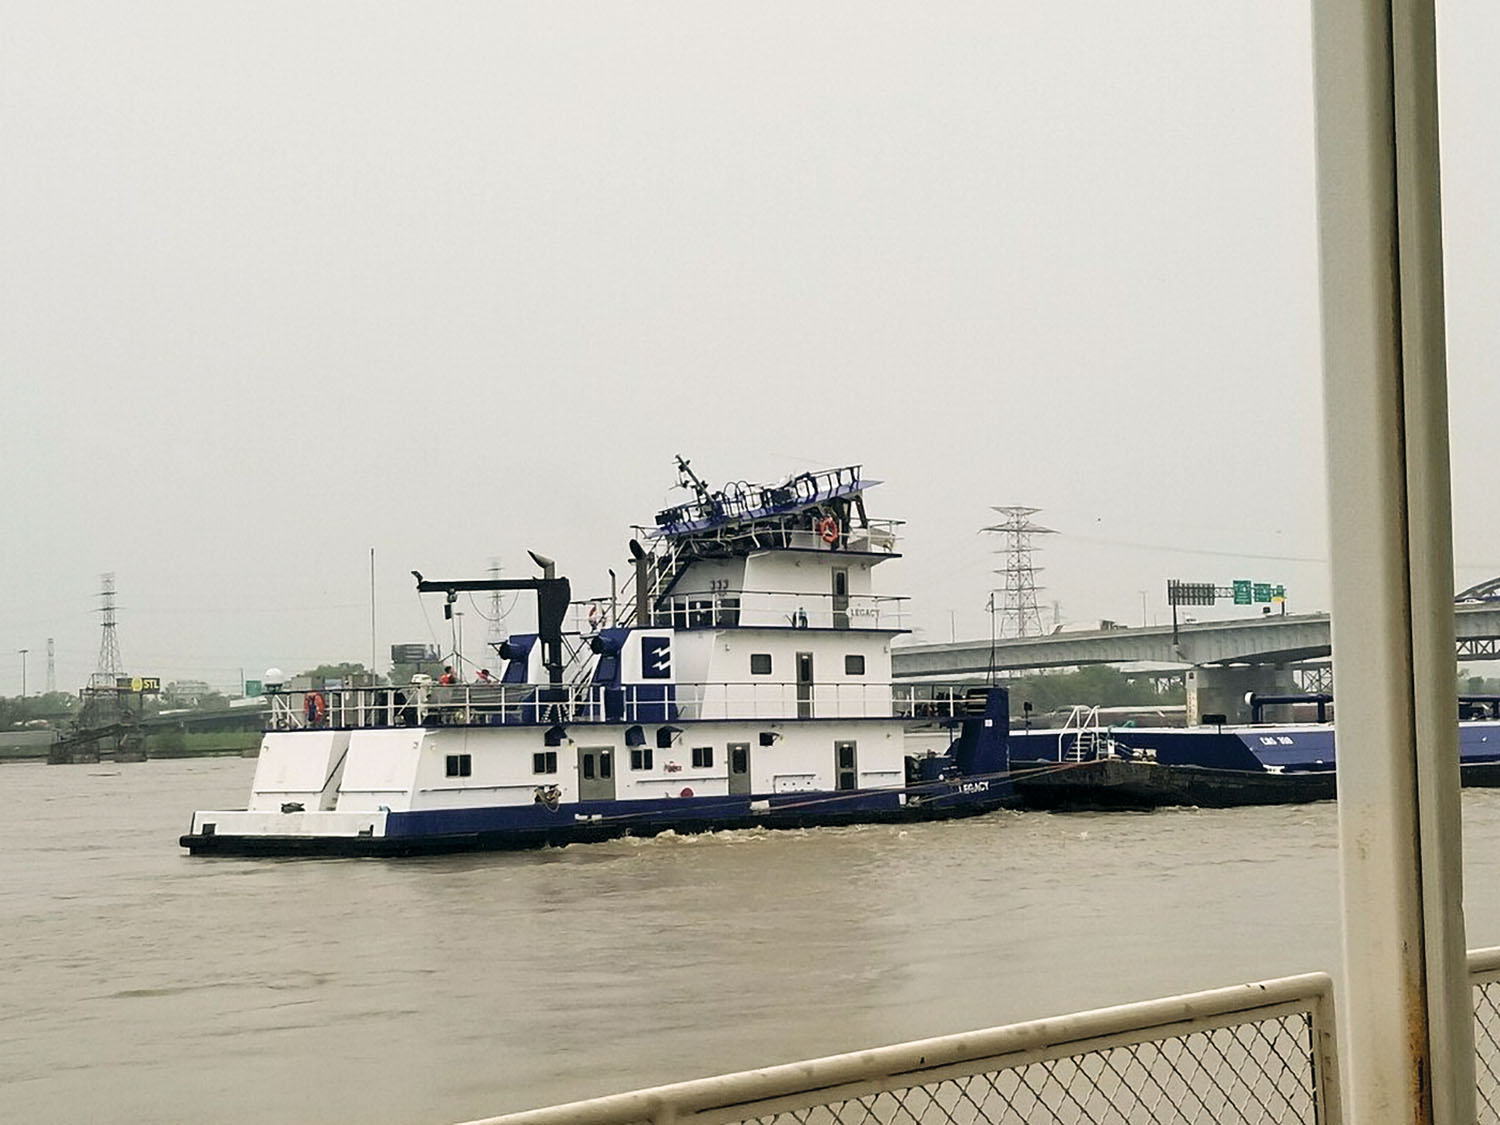 The pilothouse of the mv. Legacy was heavily damaged when the towboat struck the Eads Bridge in St. Louis May 2.